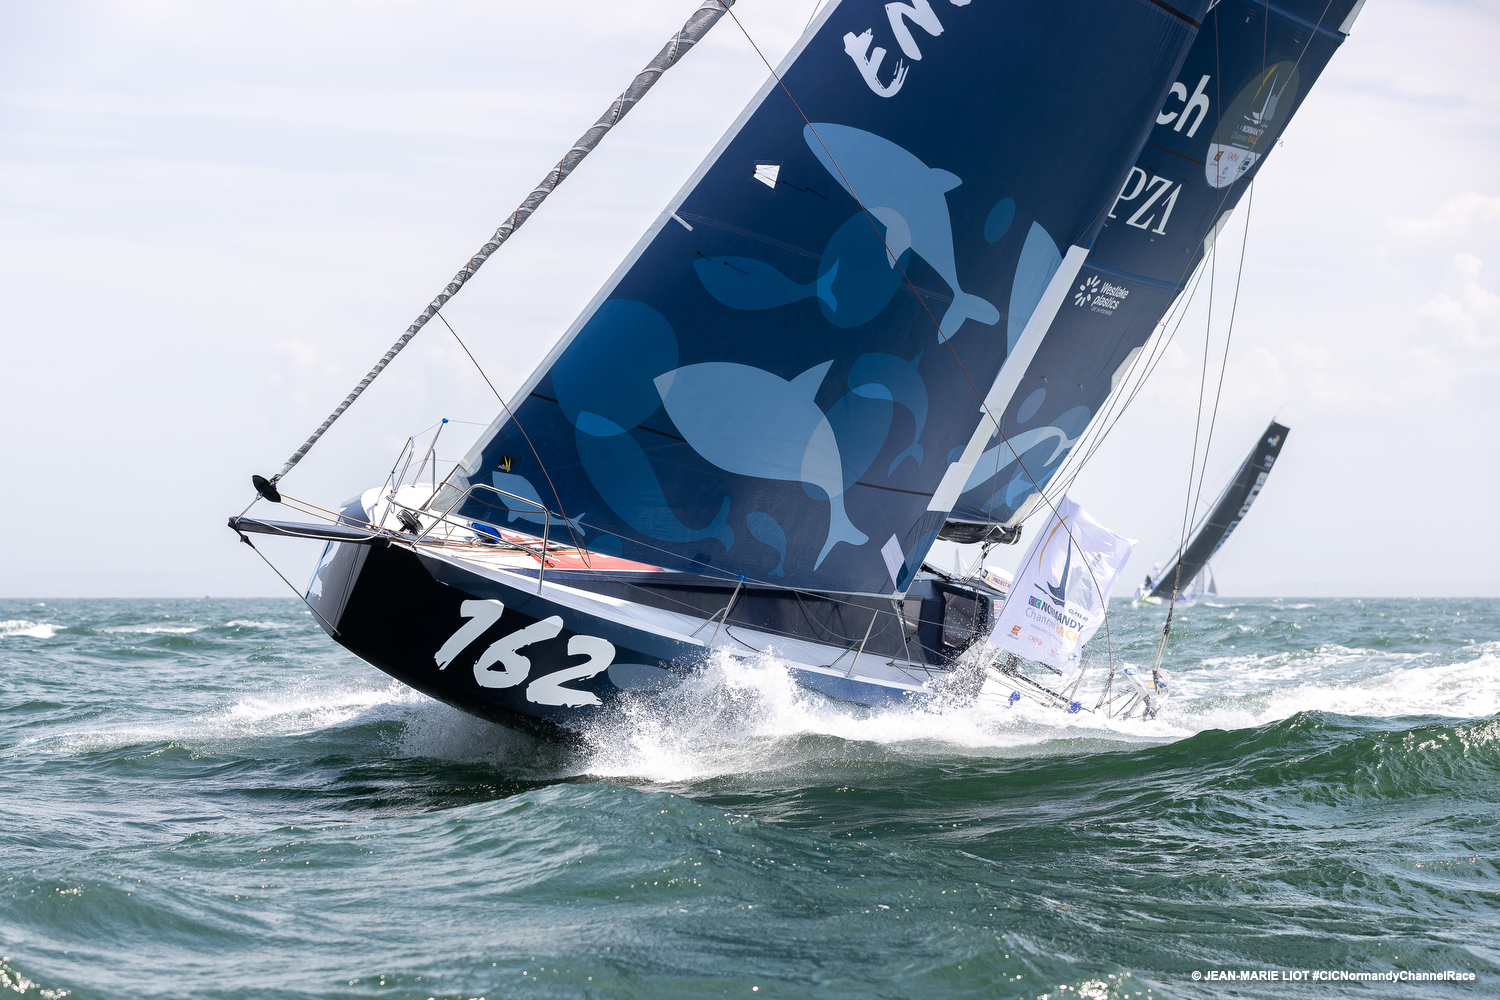  Class 40  Normandy Channel Race  Ouistreham FRA  Day 4